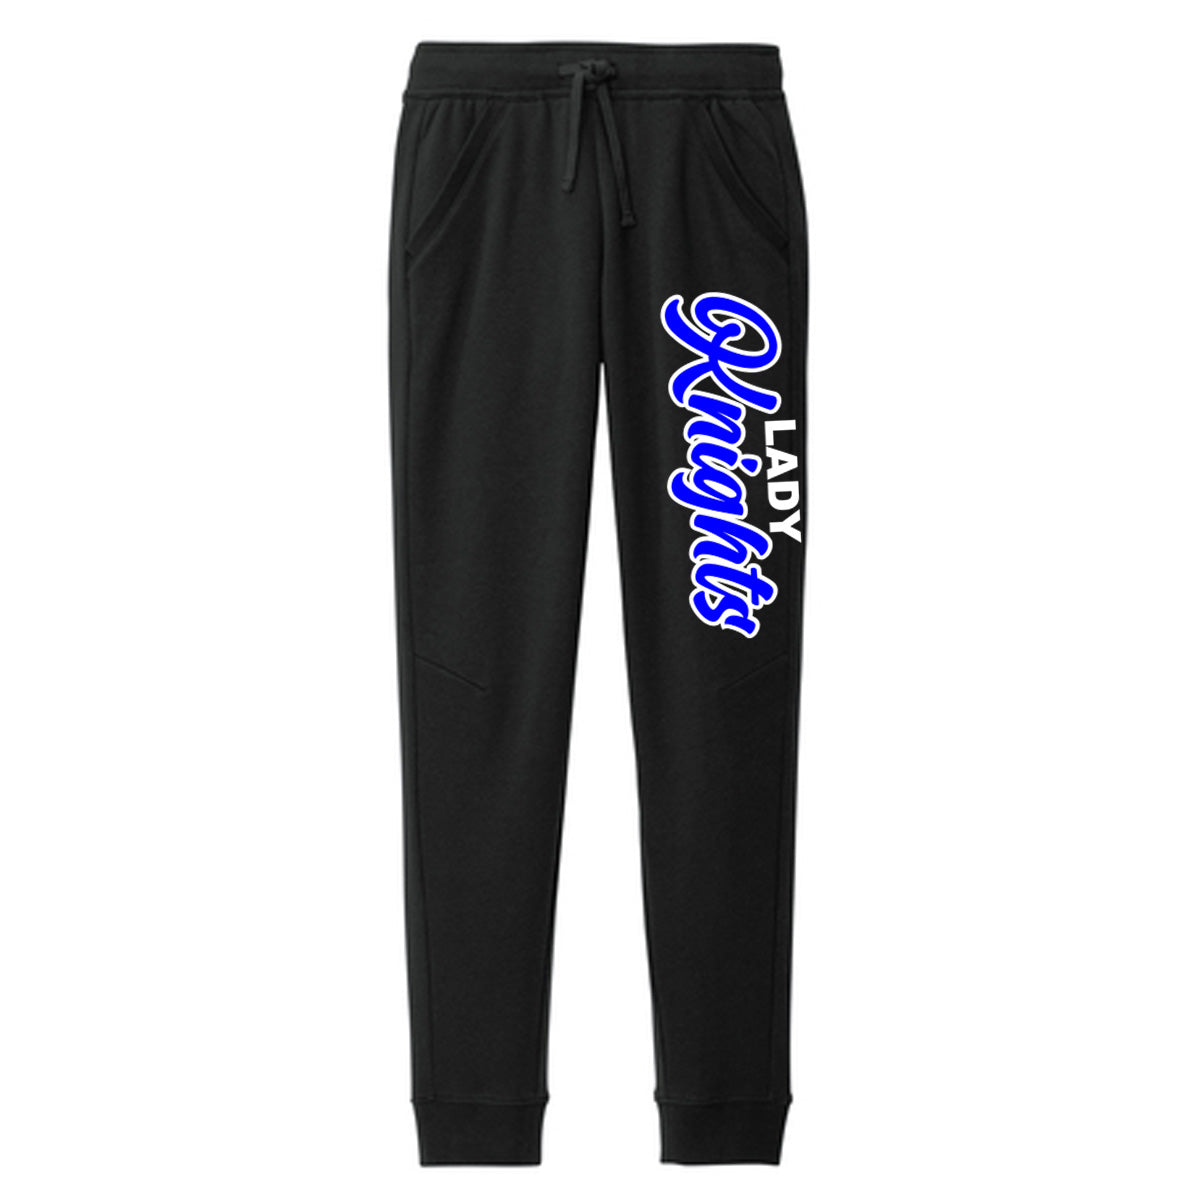 Windsor - Black Joggers with Lady Knights - Sport-Tek Drive Fleece (STF204) - Southern Grace Creations